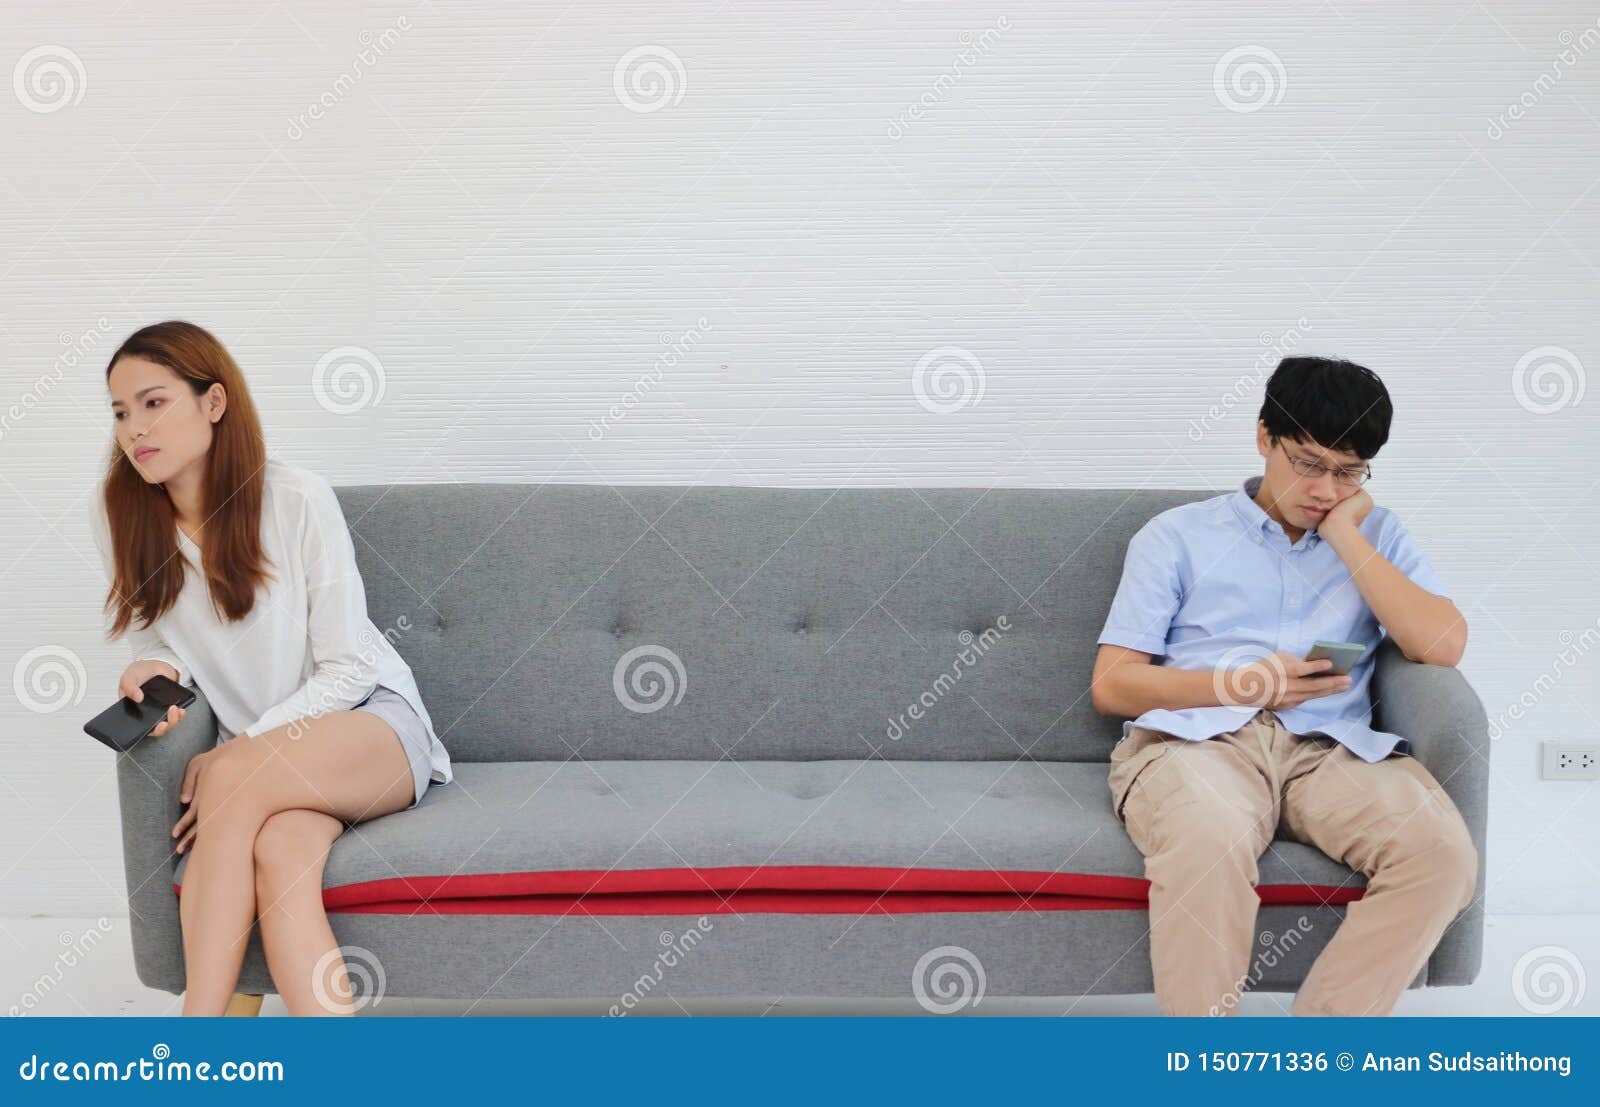 Asian couple in the living room